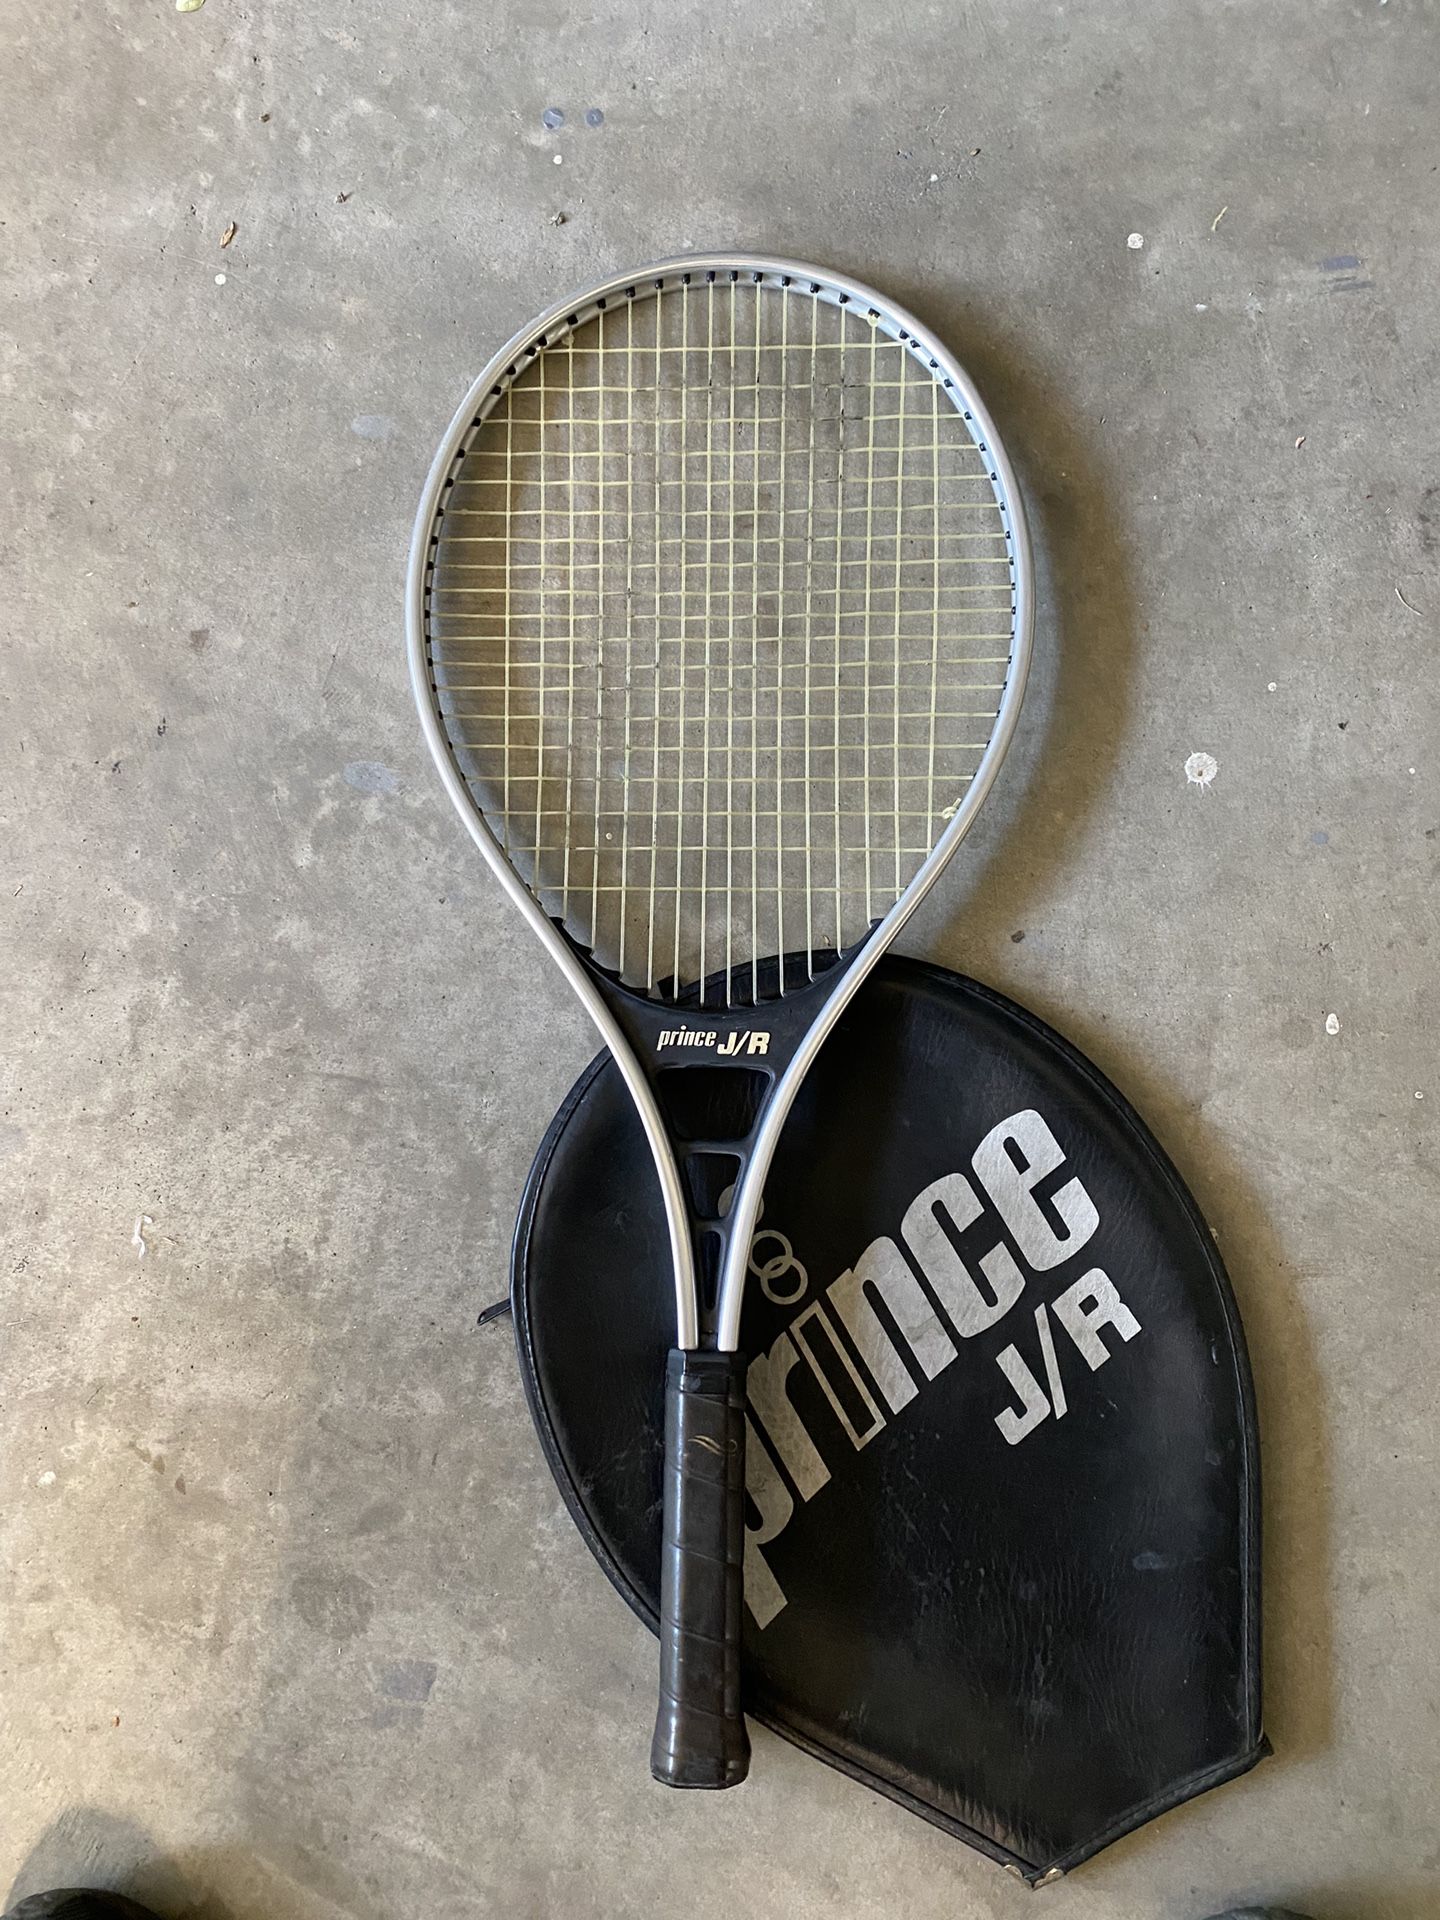 Prince J/R Tennis Racket With Cover Case